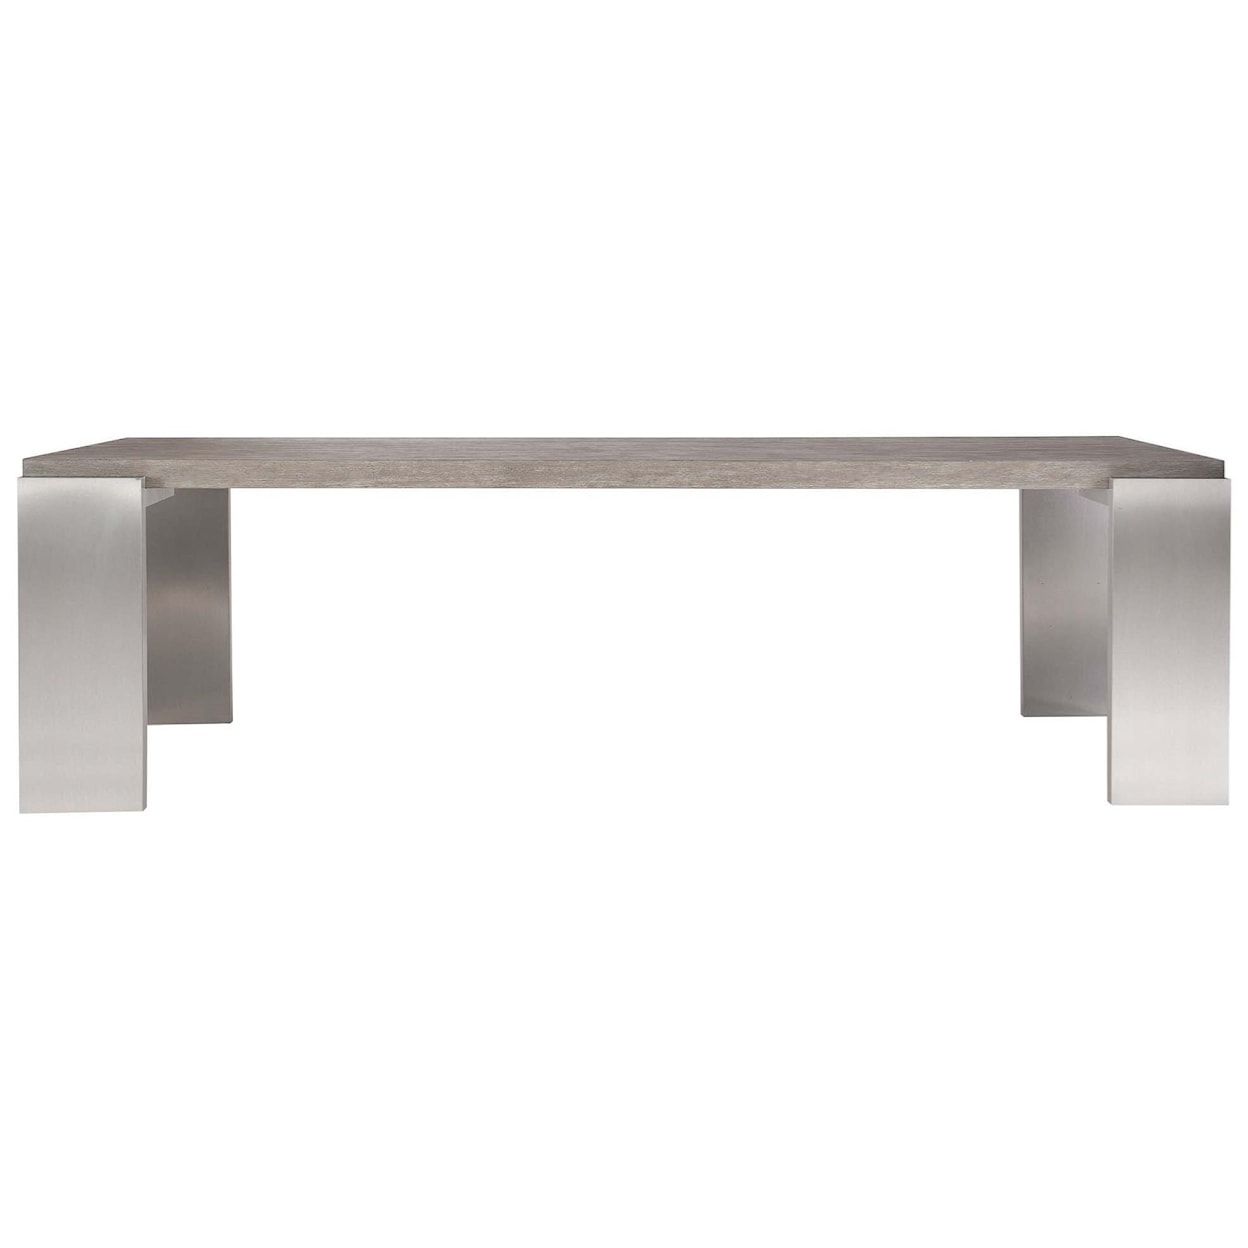 Bernhardt Foundations Foundations Dining Table